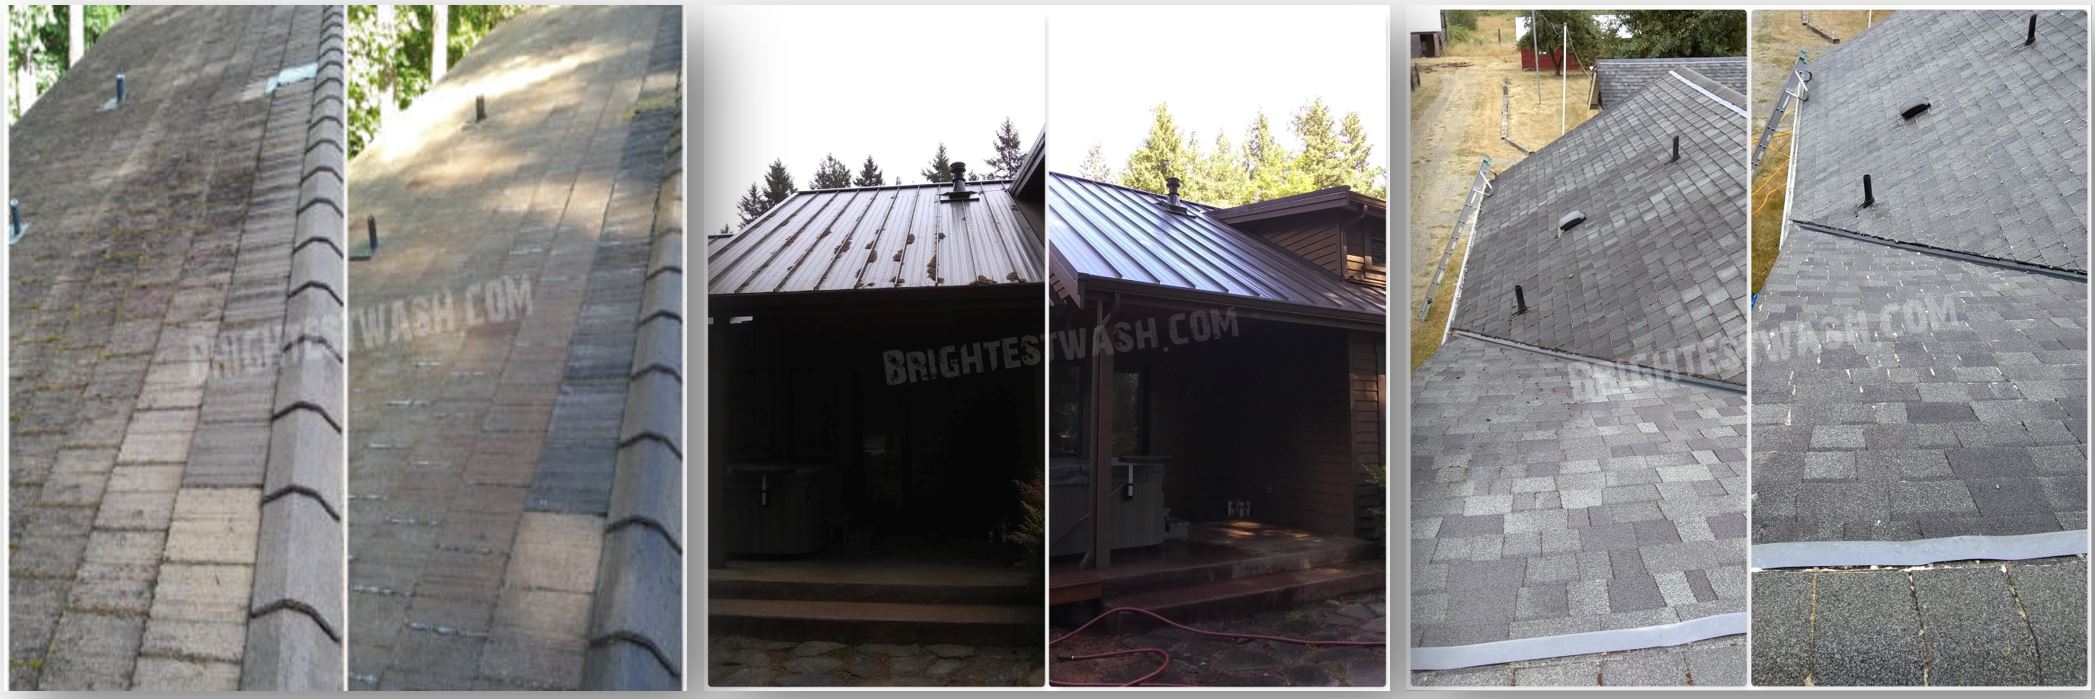 professional roof washing companies in Bremerton